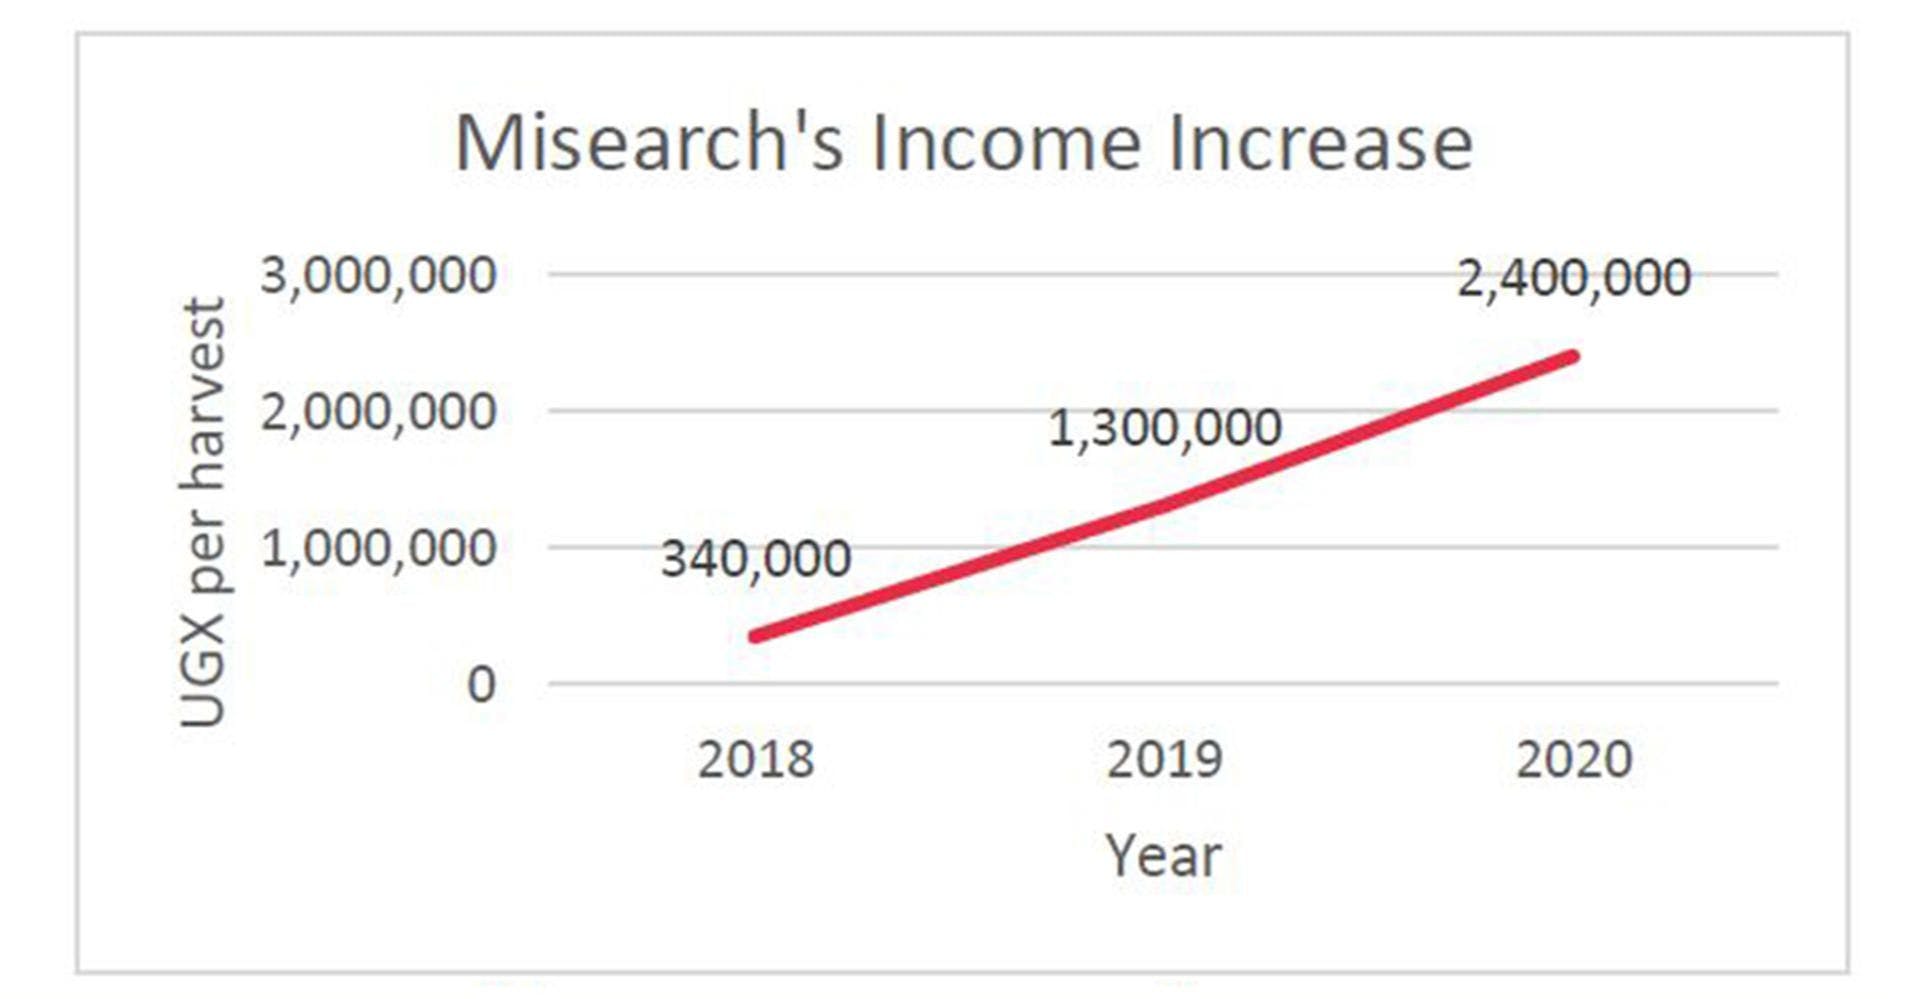 Misearch’s income increase after joining UCAT